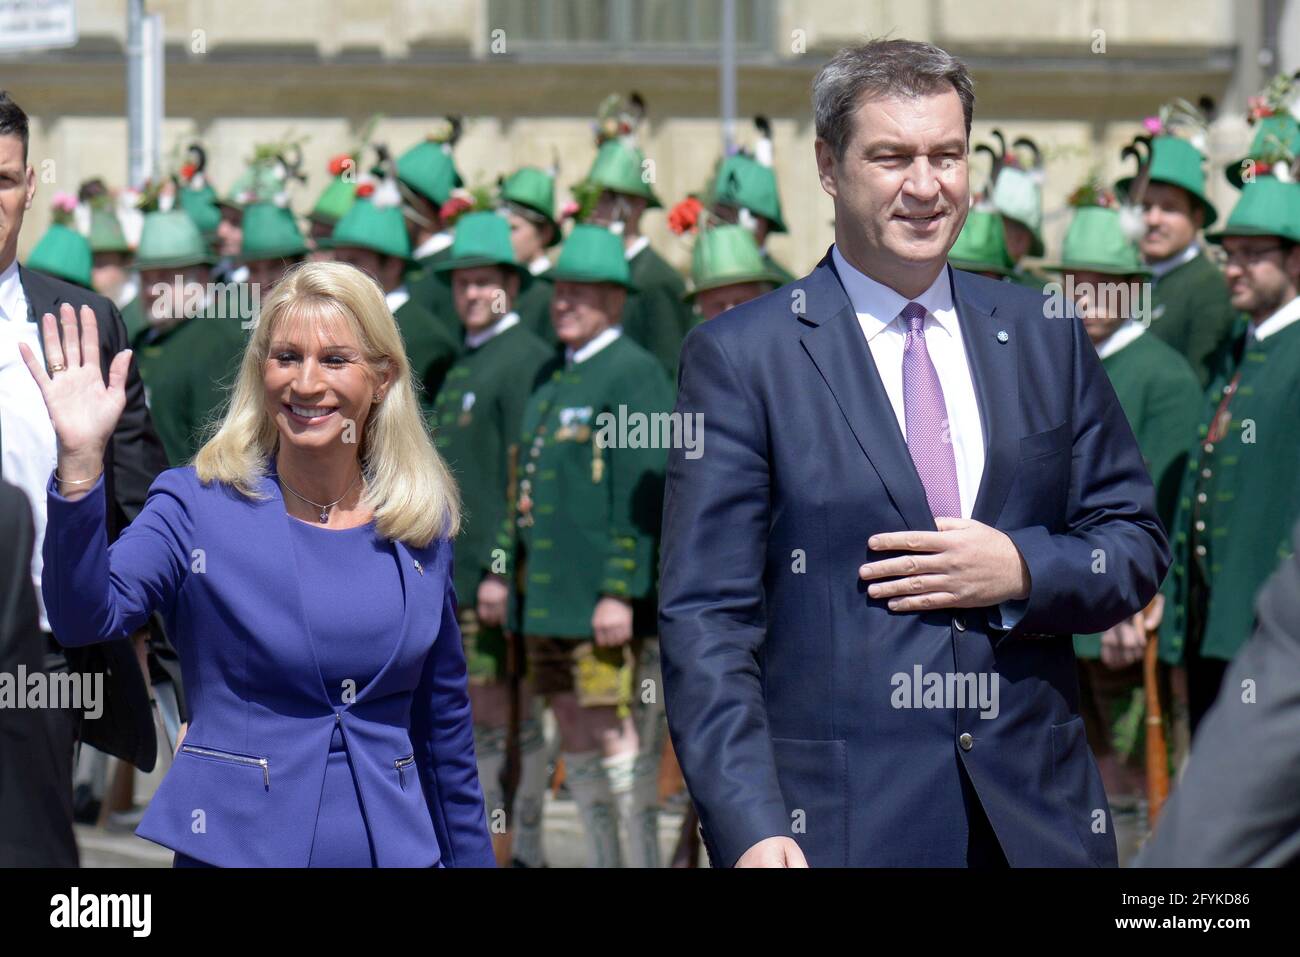 Prime Minister Dr. Markus Soeder and his wife Karin on the way to welcome Prince Charles and his wife Camilla at Max-Joseph-Platz in Munich Stock Photo